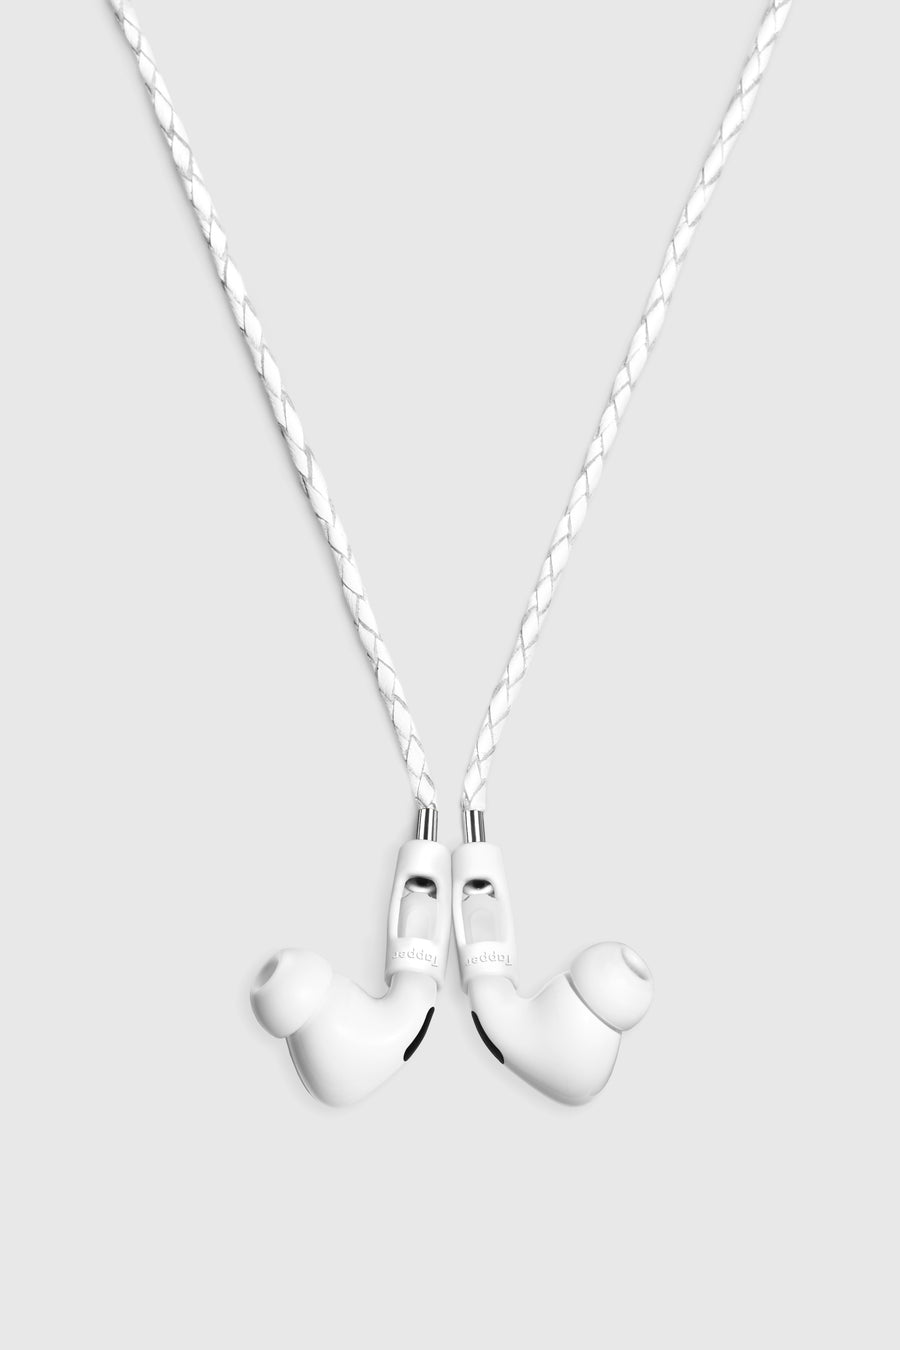 Tapper's original genuine lamb leather straps protects your Apple AirPods and AirPods Pro. The accessible AirPods necklace in real leather steps up your AirPods and AirPods Pro jewellery game. Worried about losing your AirPods? Built-in magnetic lock for convenient and hassle-free safekeeping around your neck. The next must-have AirPods accessory crafted for ultimate luxury. Compatible with all generations of AirPods and AirPods Pro. Designed in Sweden by Tapper. Free Express Shipping at gettapper.com